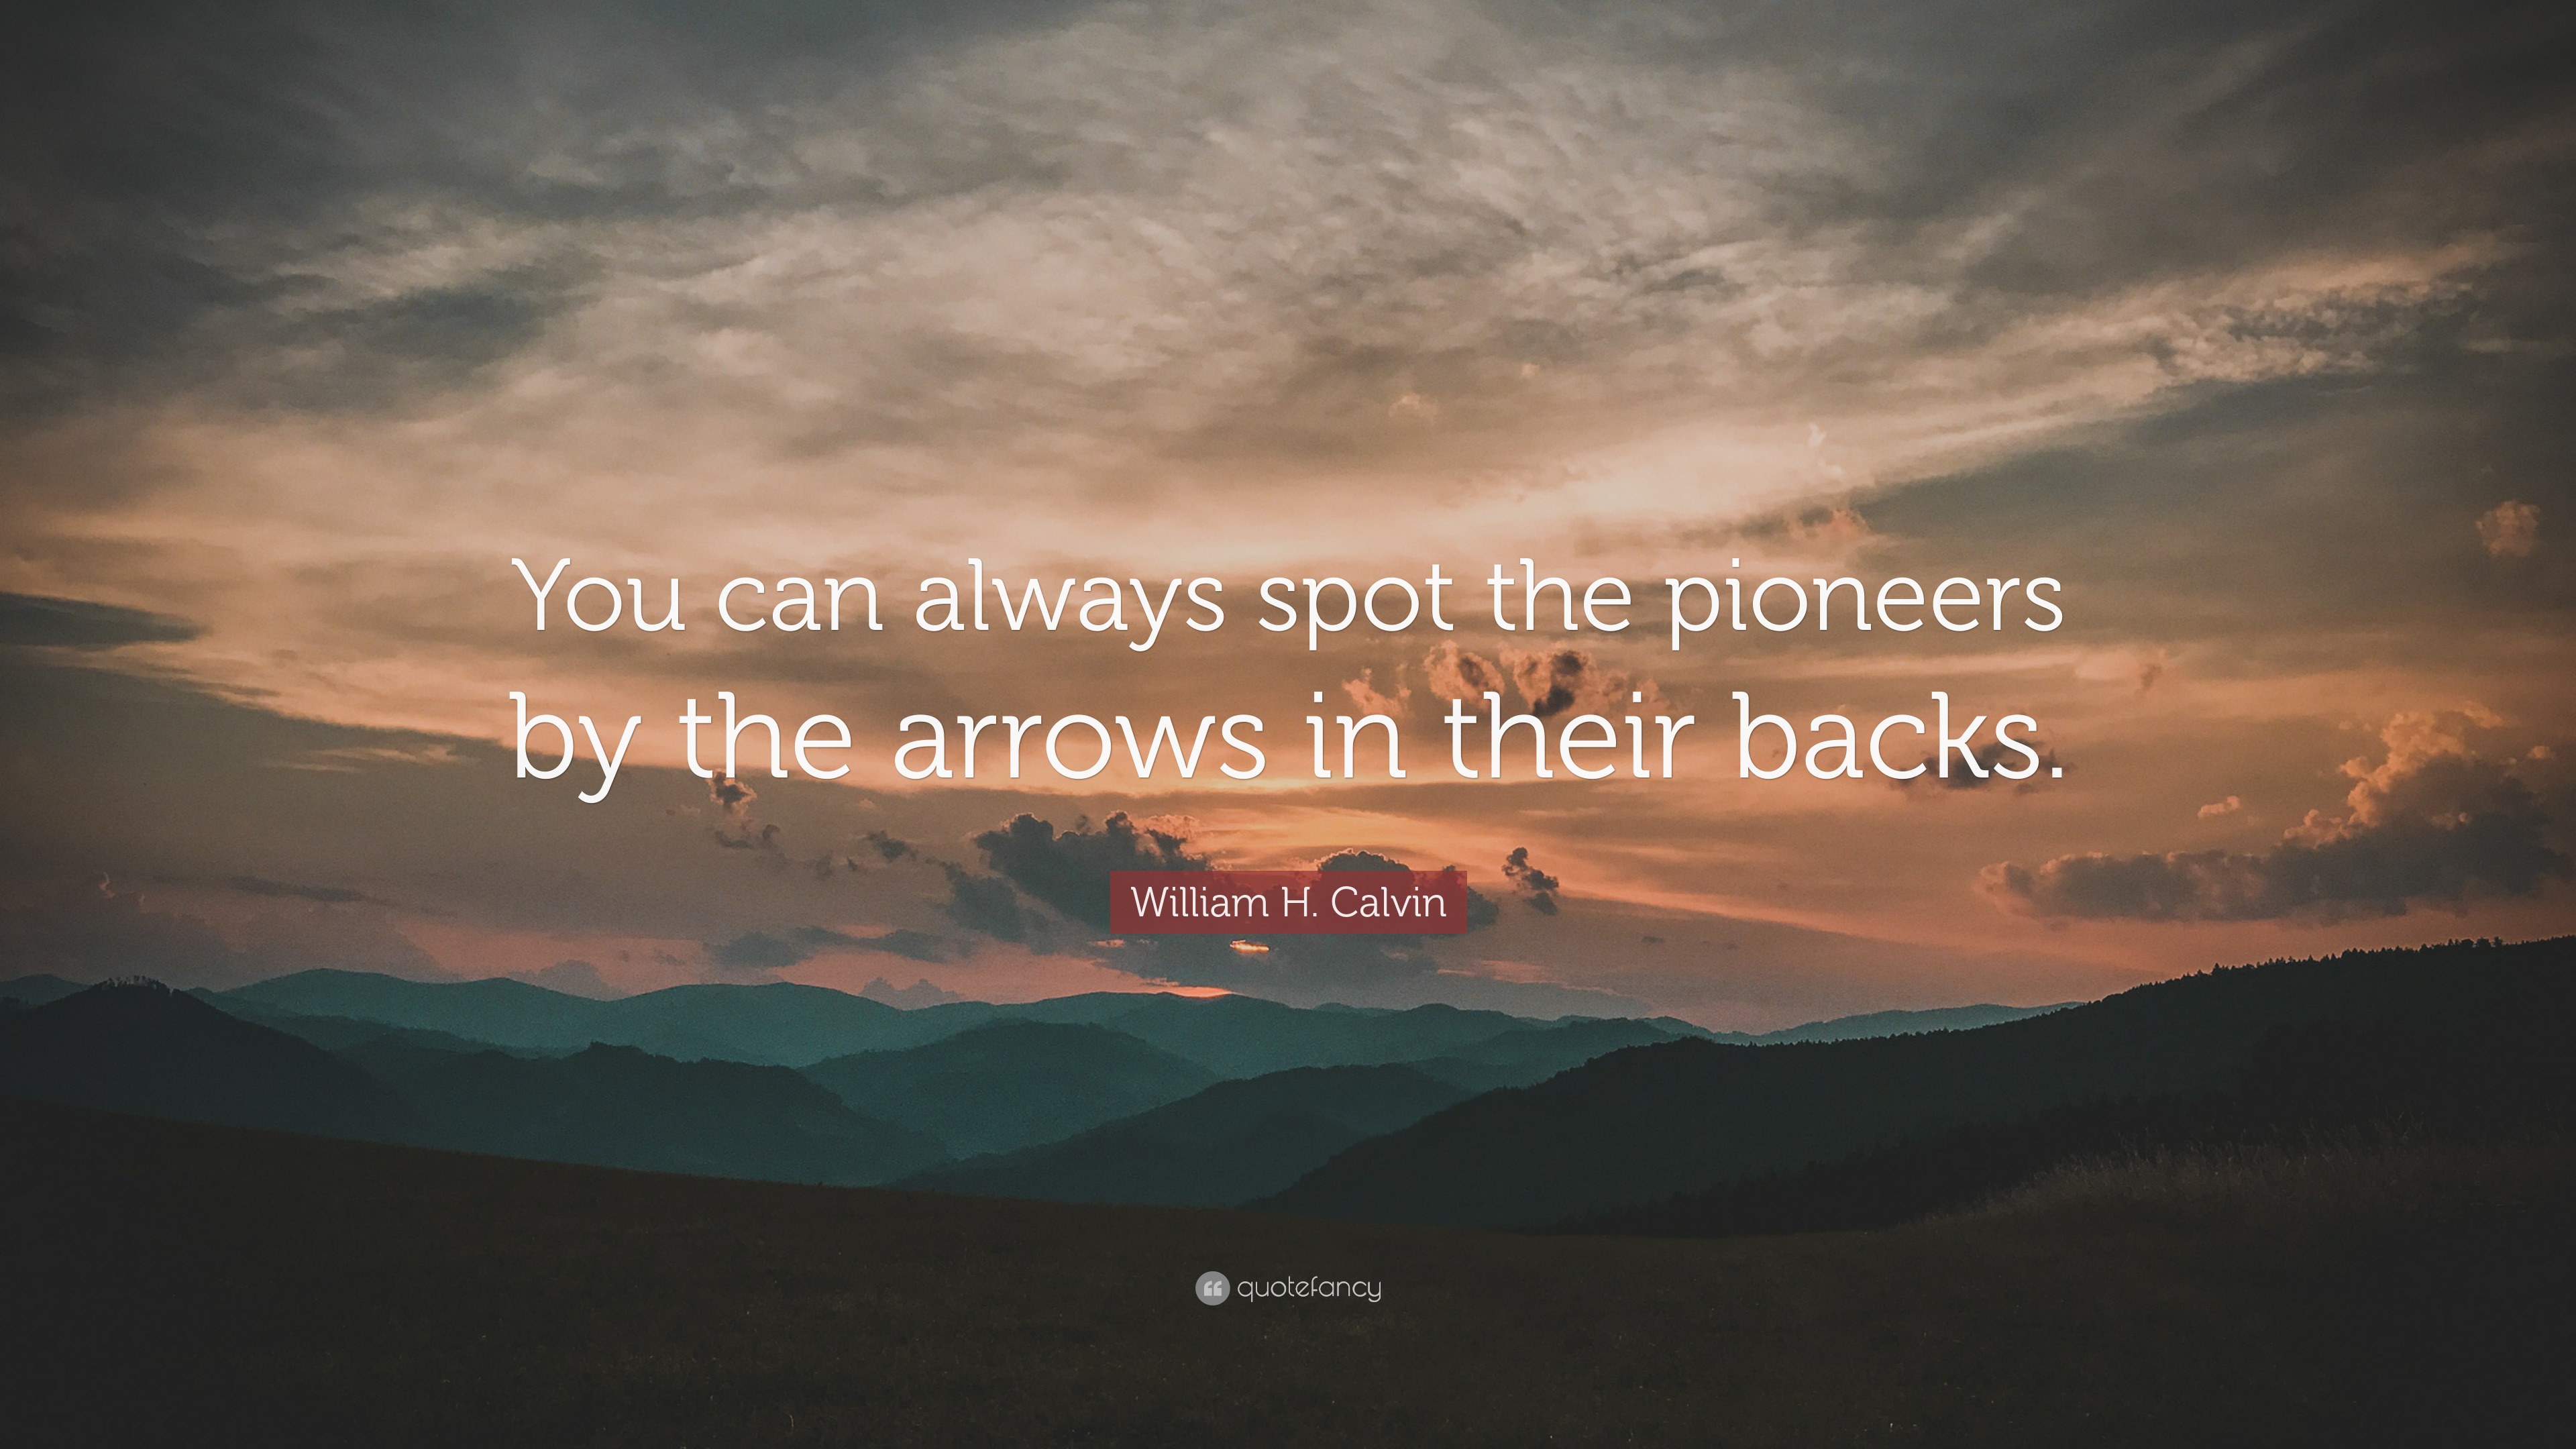 William H Calvin Quote You Can Always Spot The Pioneers By The Arrows In Their Backs